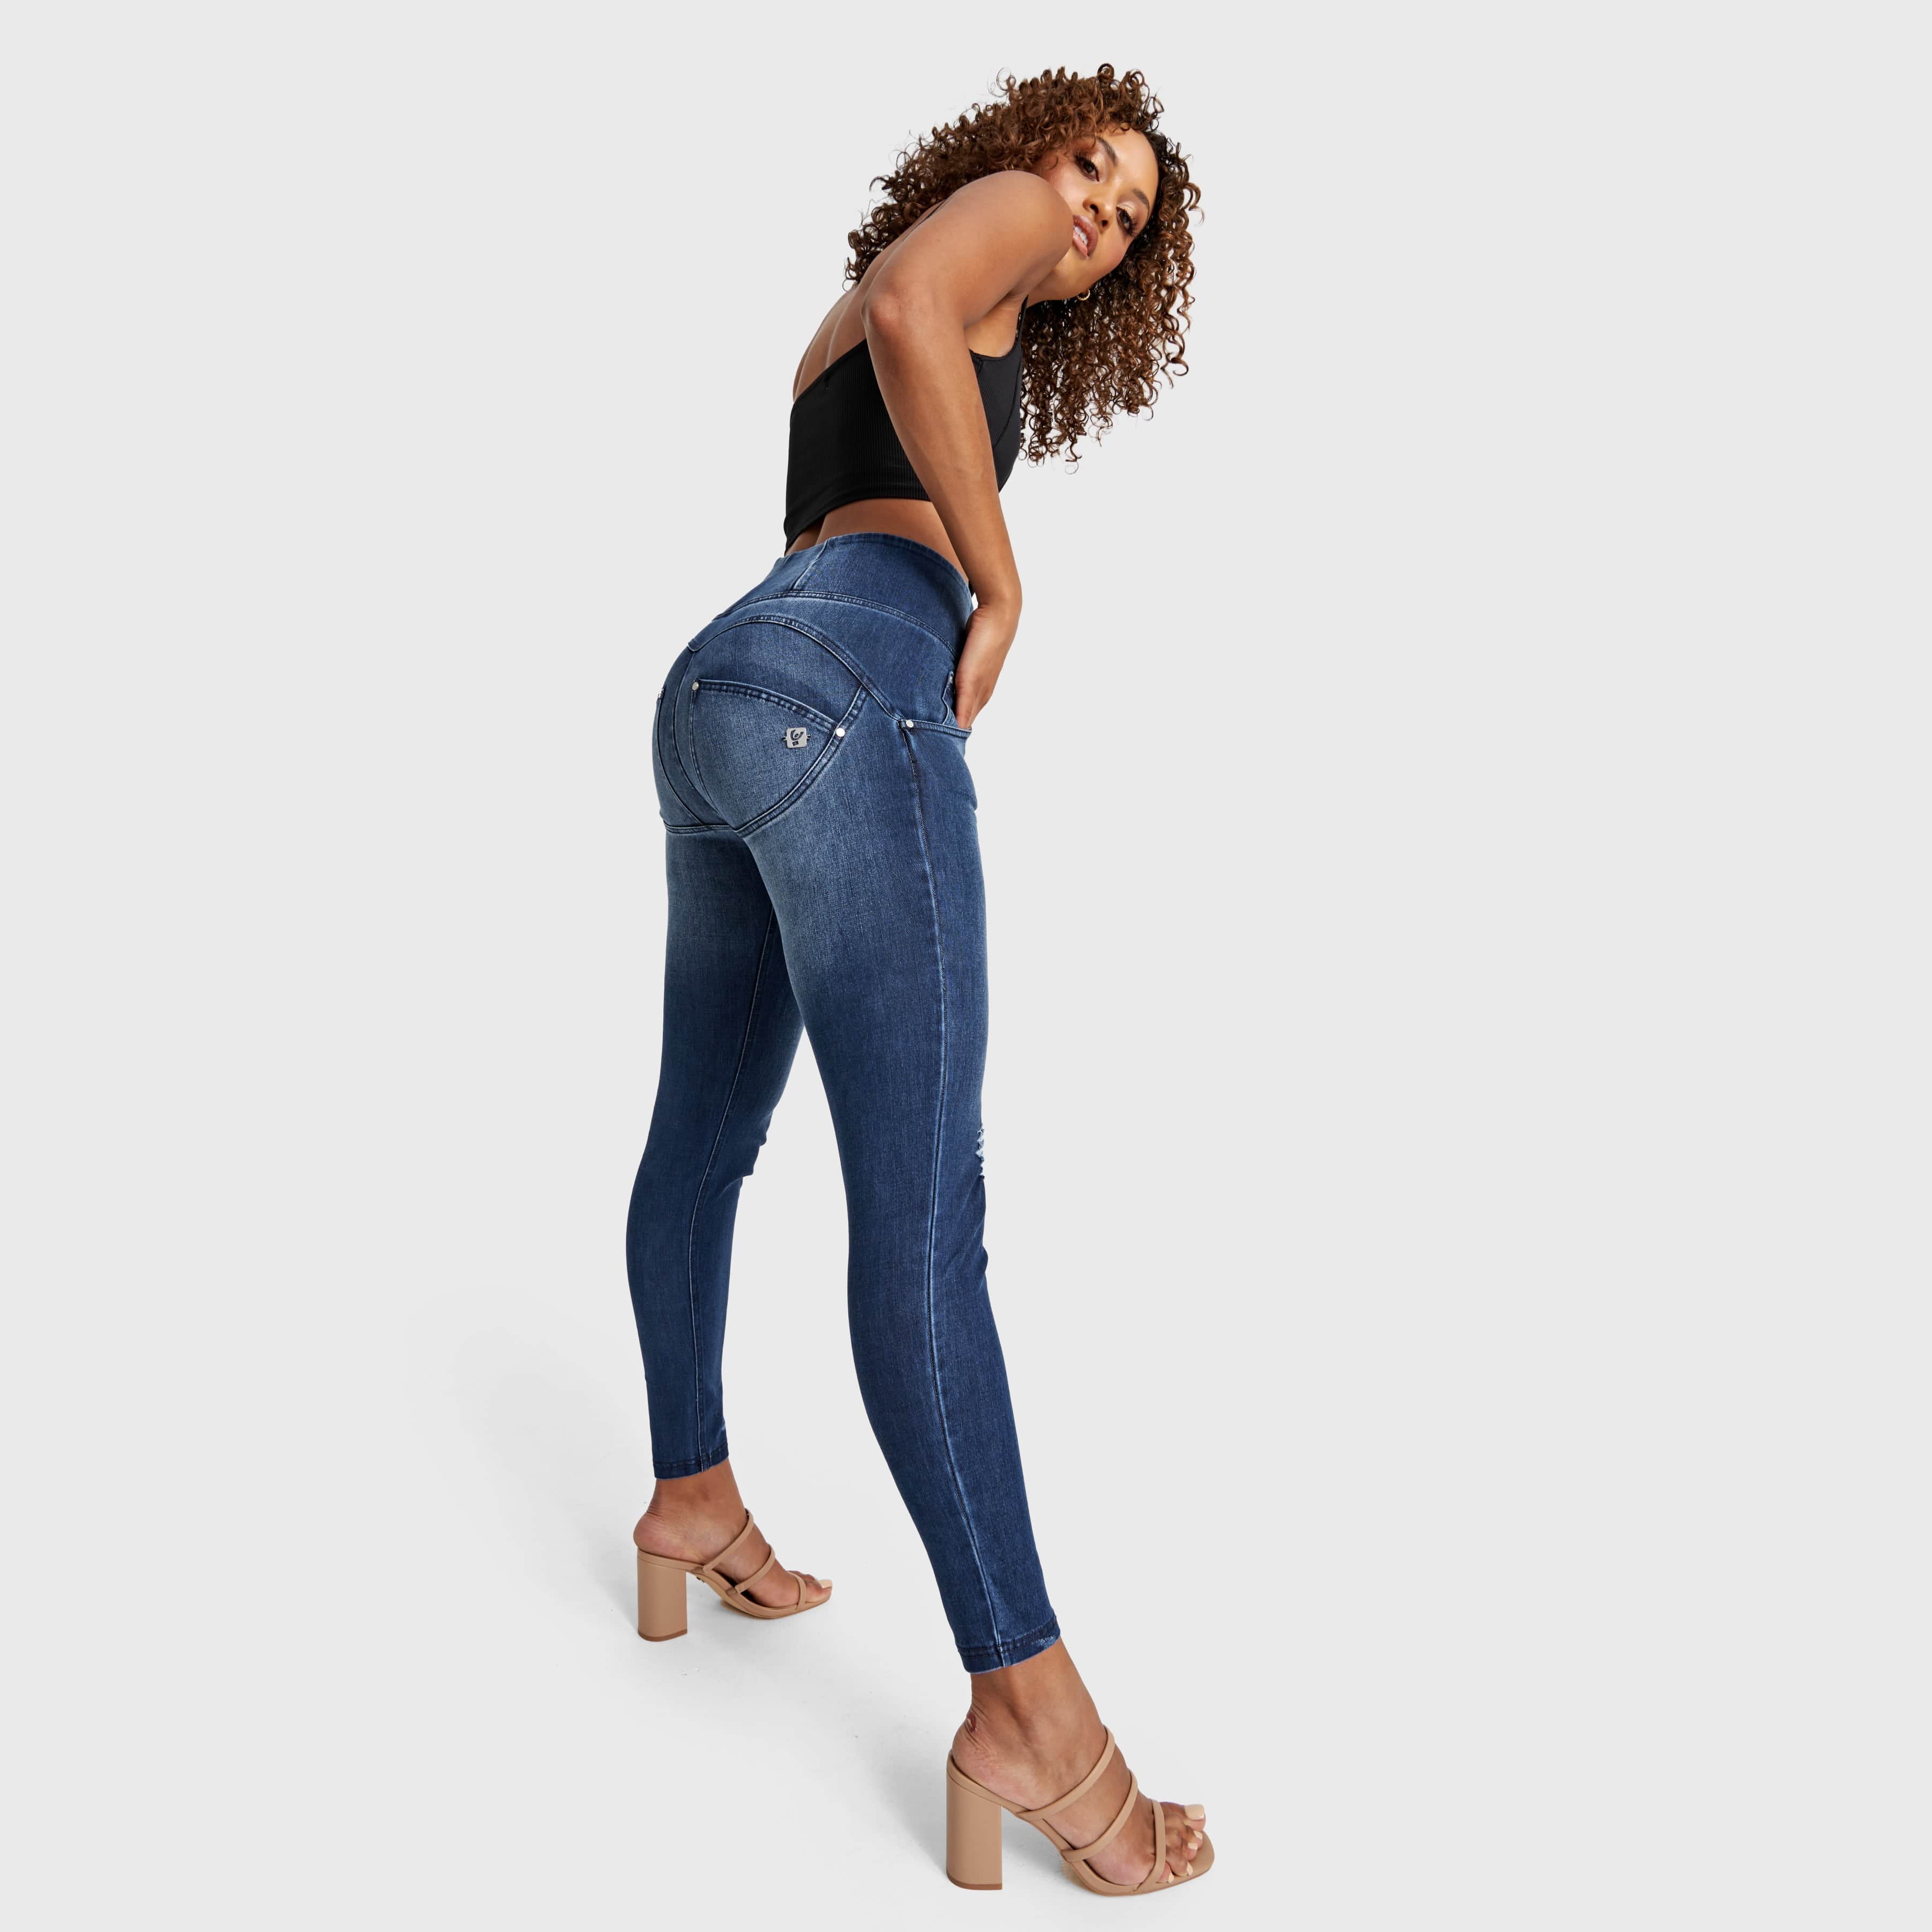 WR.UP® Snug Distressed Jeans - High Waisted - Full Length - Dark Blue + Blue Stitching 3